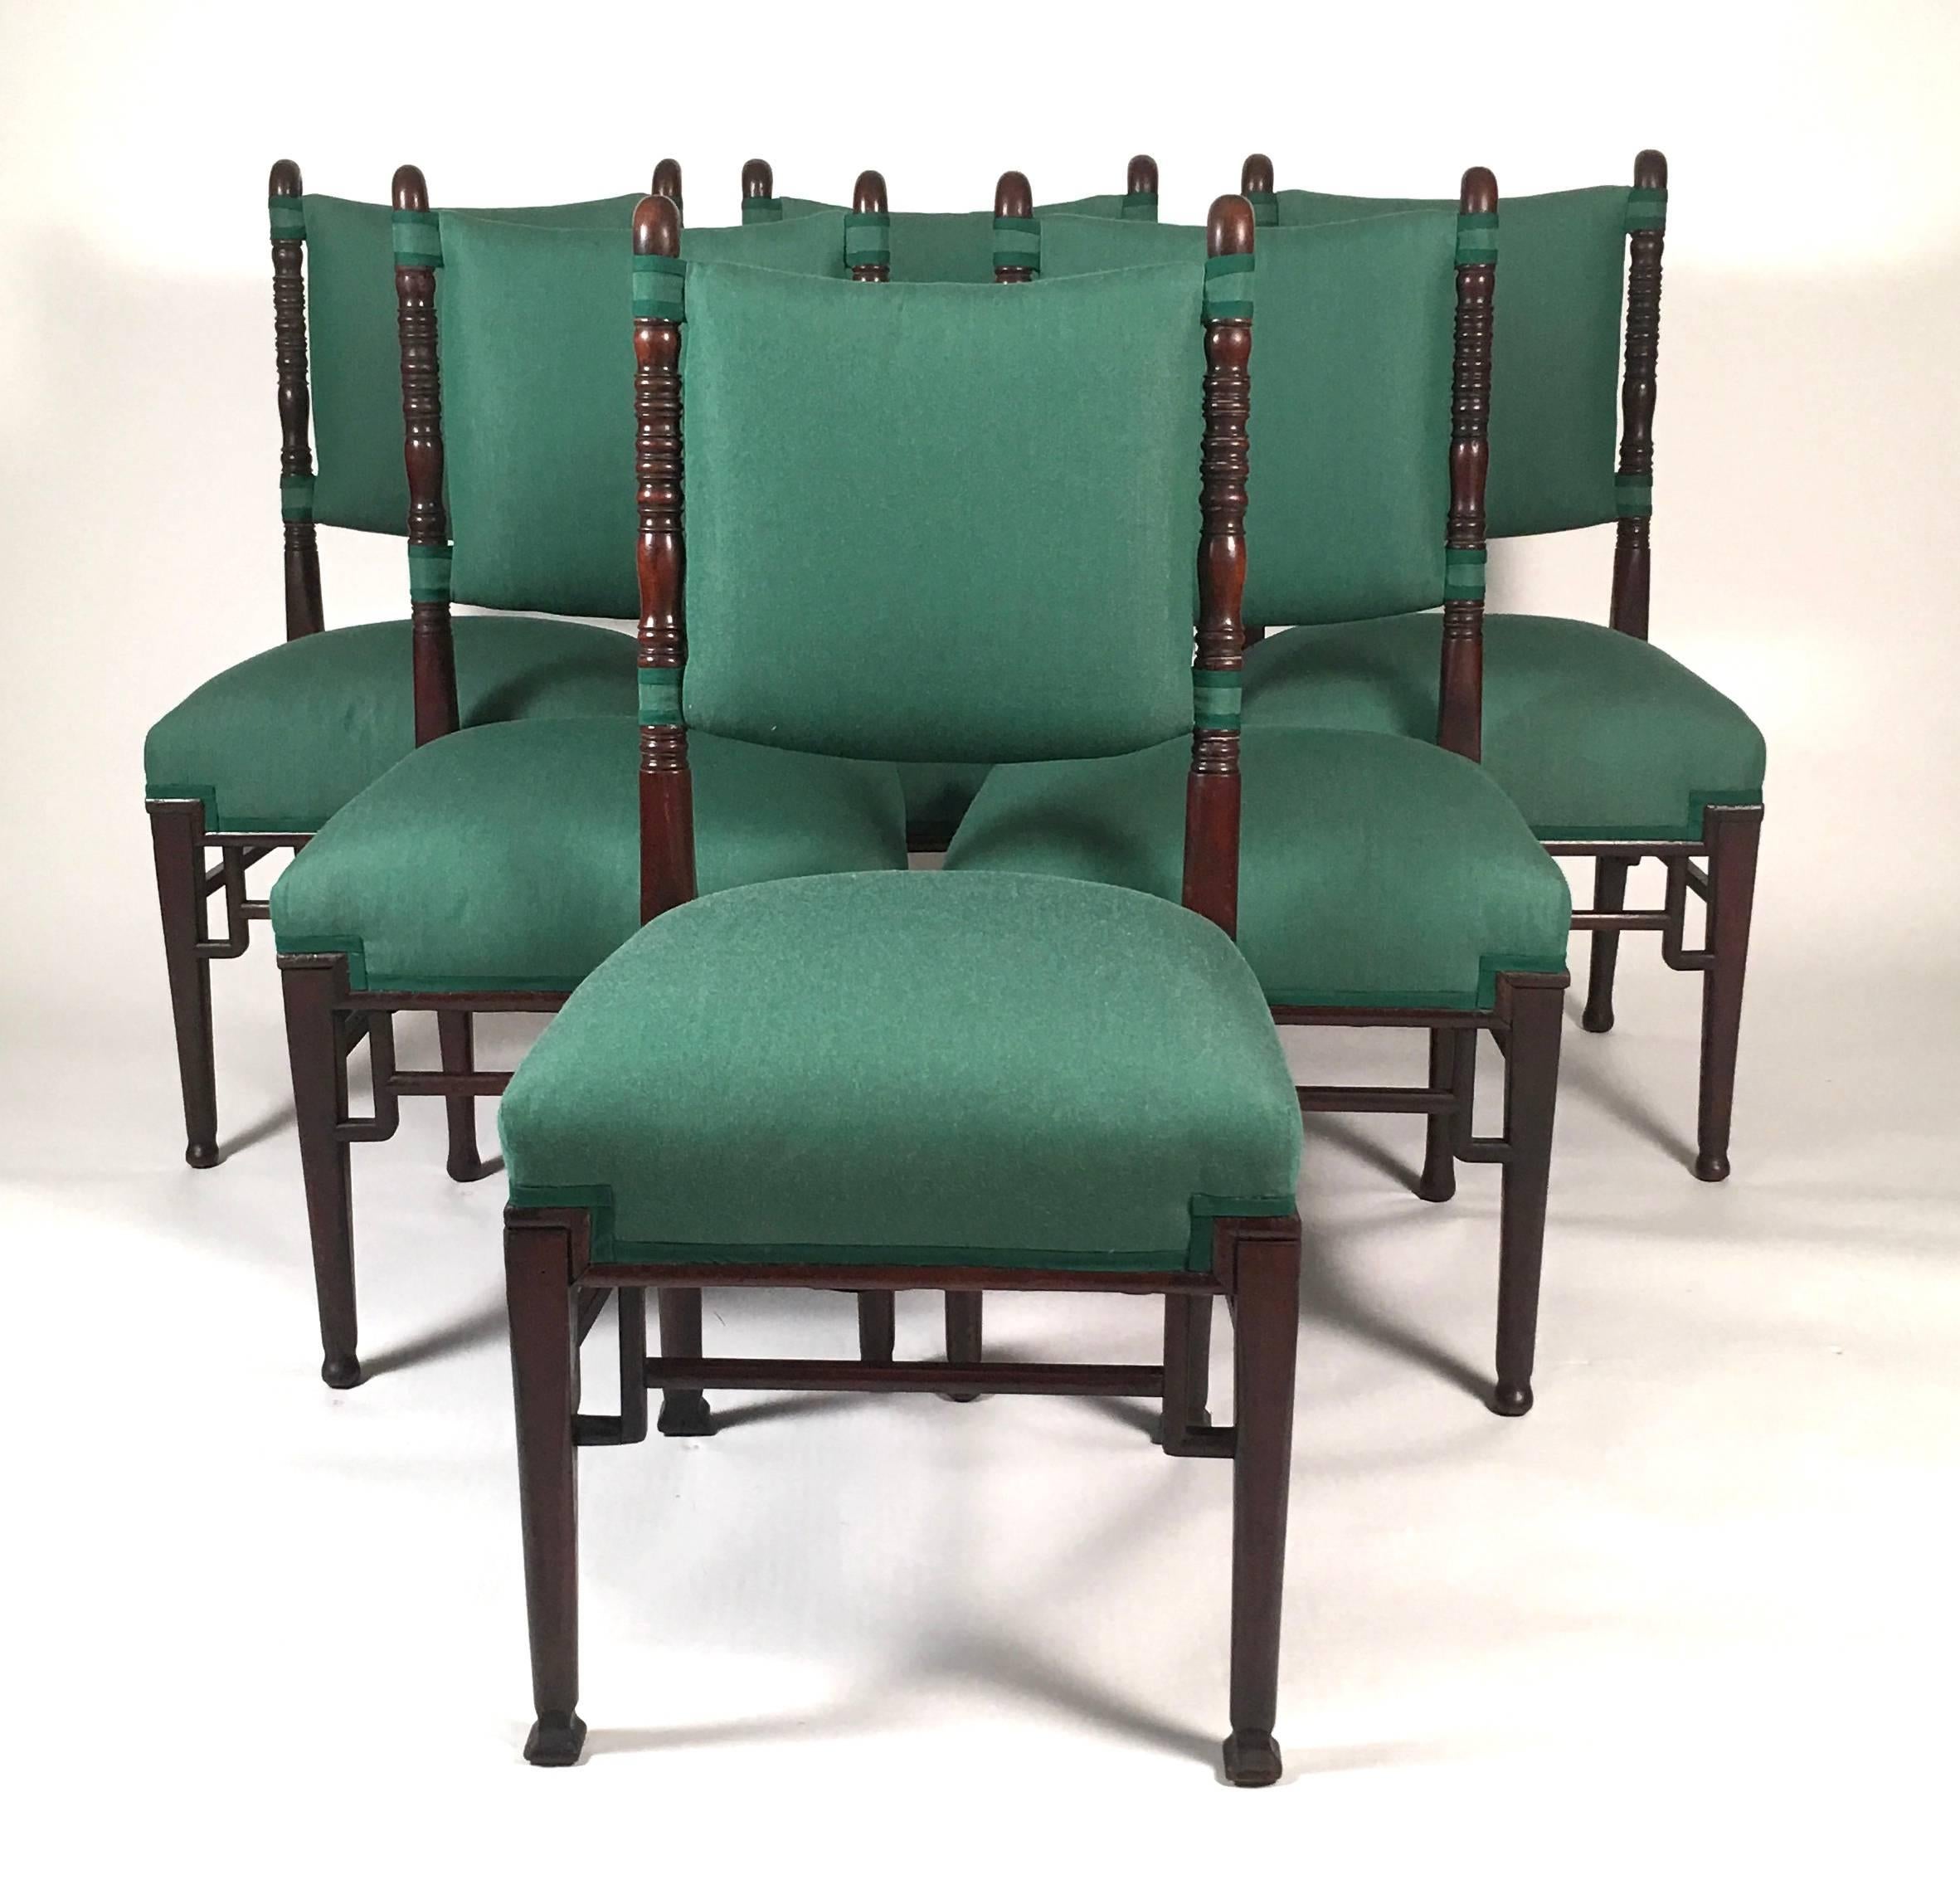 An unusual and well made matched set of six Aesthetic movement period dining chairs by Charles Yandell and Co, New York, with upholstered backs and seats, the side rails with shepherd's crook swan's heads and necks over ring turned decoration, the